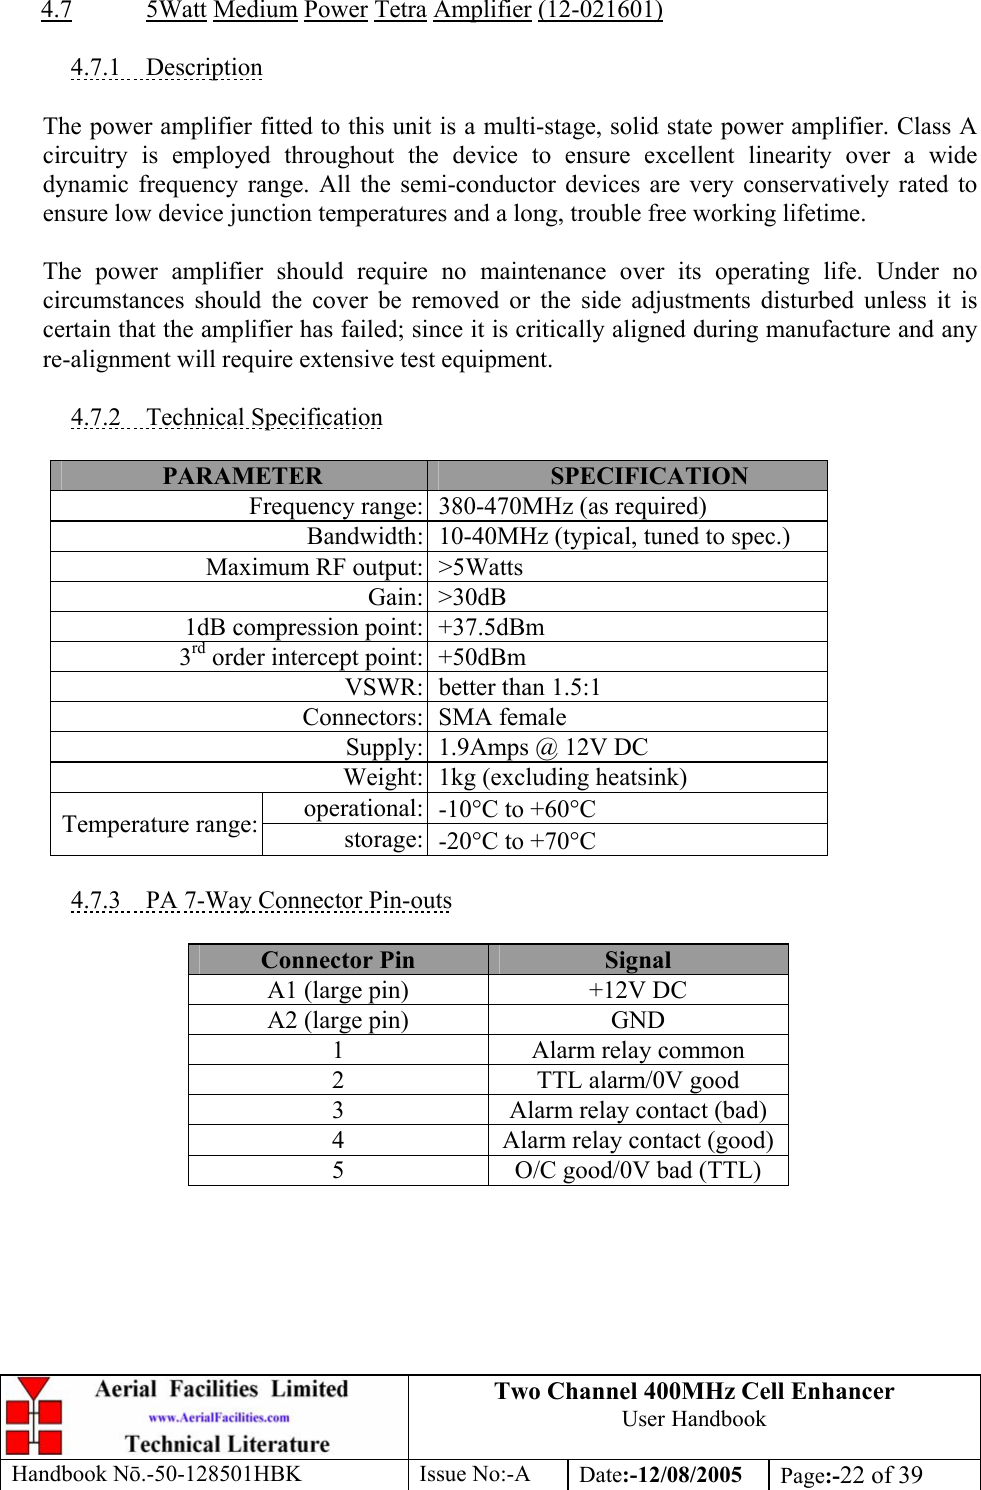 Two Channel 400MHz Cell Enhancer User Handbook Handbook N.-50-128501HBK Issue No:-A Date:-12/08/2005  Page:-22 of 39   4.7 5Watt Medium Power Tetra Amplifier (12-021601)  4.7.1 Description  The power amplifier fitted to this unit is a multi-stage, solid state power amplifier. Class A circuitry is employed throughout the device to ensure excellent linearity over a wide dynamic frequency range. All the semi-conductor devices are very conservatively rated to ensure low device junction temperatures and a long, trouble free working lifetime.  The power amplifier should require no maintenance over its operating life. Under no circumstances should the cover be removed or the side adjustments disturbed unless it is certain that the amplifier has failed; since it is critically aligned during manufacture and any re-alignment will require extensive test equipment.  4.7.2 Technical Specification  PARAMETER  SPECIFICATION Frequency range: 380-470MHz (as required) Bandwidth: 10-40MHz (typical, tuned to spec.) Maximum RF output: &gt;5Watts Gain: &gt;30dB 1dB compression point: +37.5dBm 3rd order intercept point: +50dBm VSWR: better than 1.5:1 Connectors: SMA female Supply: 1.9Amps @ 12V DC Weight: 1kg (excluding heatsink) operational: -10°C to +60°C Temperature range:  storage: -20°C to +70°C  4.7.3  PA 7-Way Connector Pin-outs  Connector Pin  Signal A1 (large pin)  +12V DC A2 (large pin)  GND 1  Alarm relay common 2  TTL alarm/0V good 3  Alarm relay contact (bad) 4  Alarm relay contact (good) 5  O/C good/0V bad (TTL)  